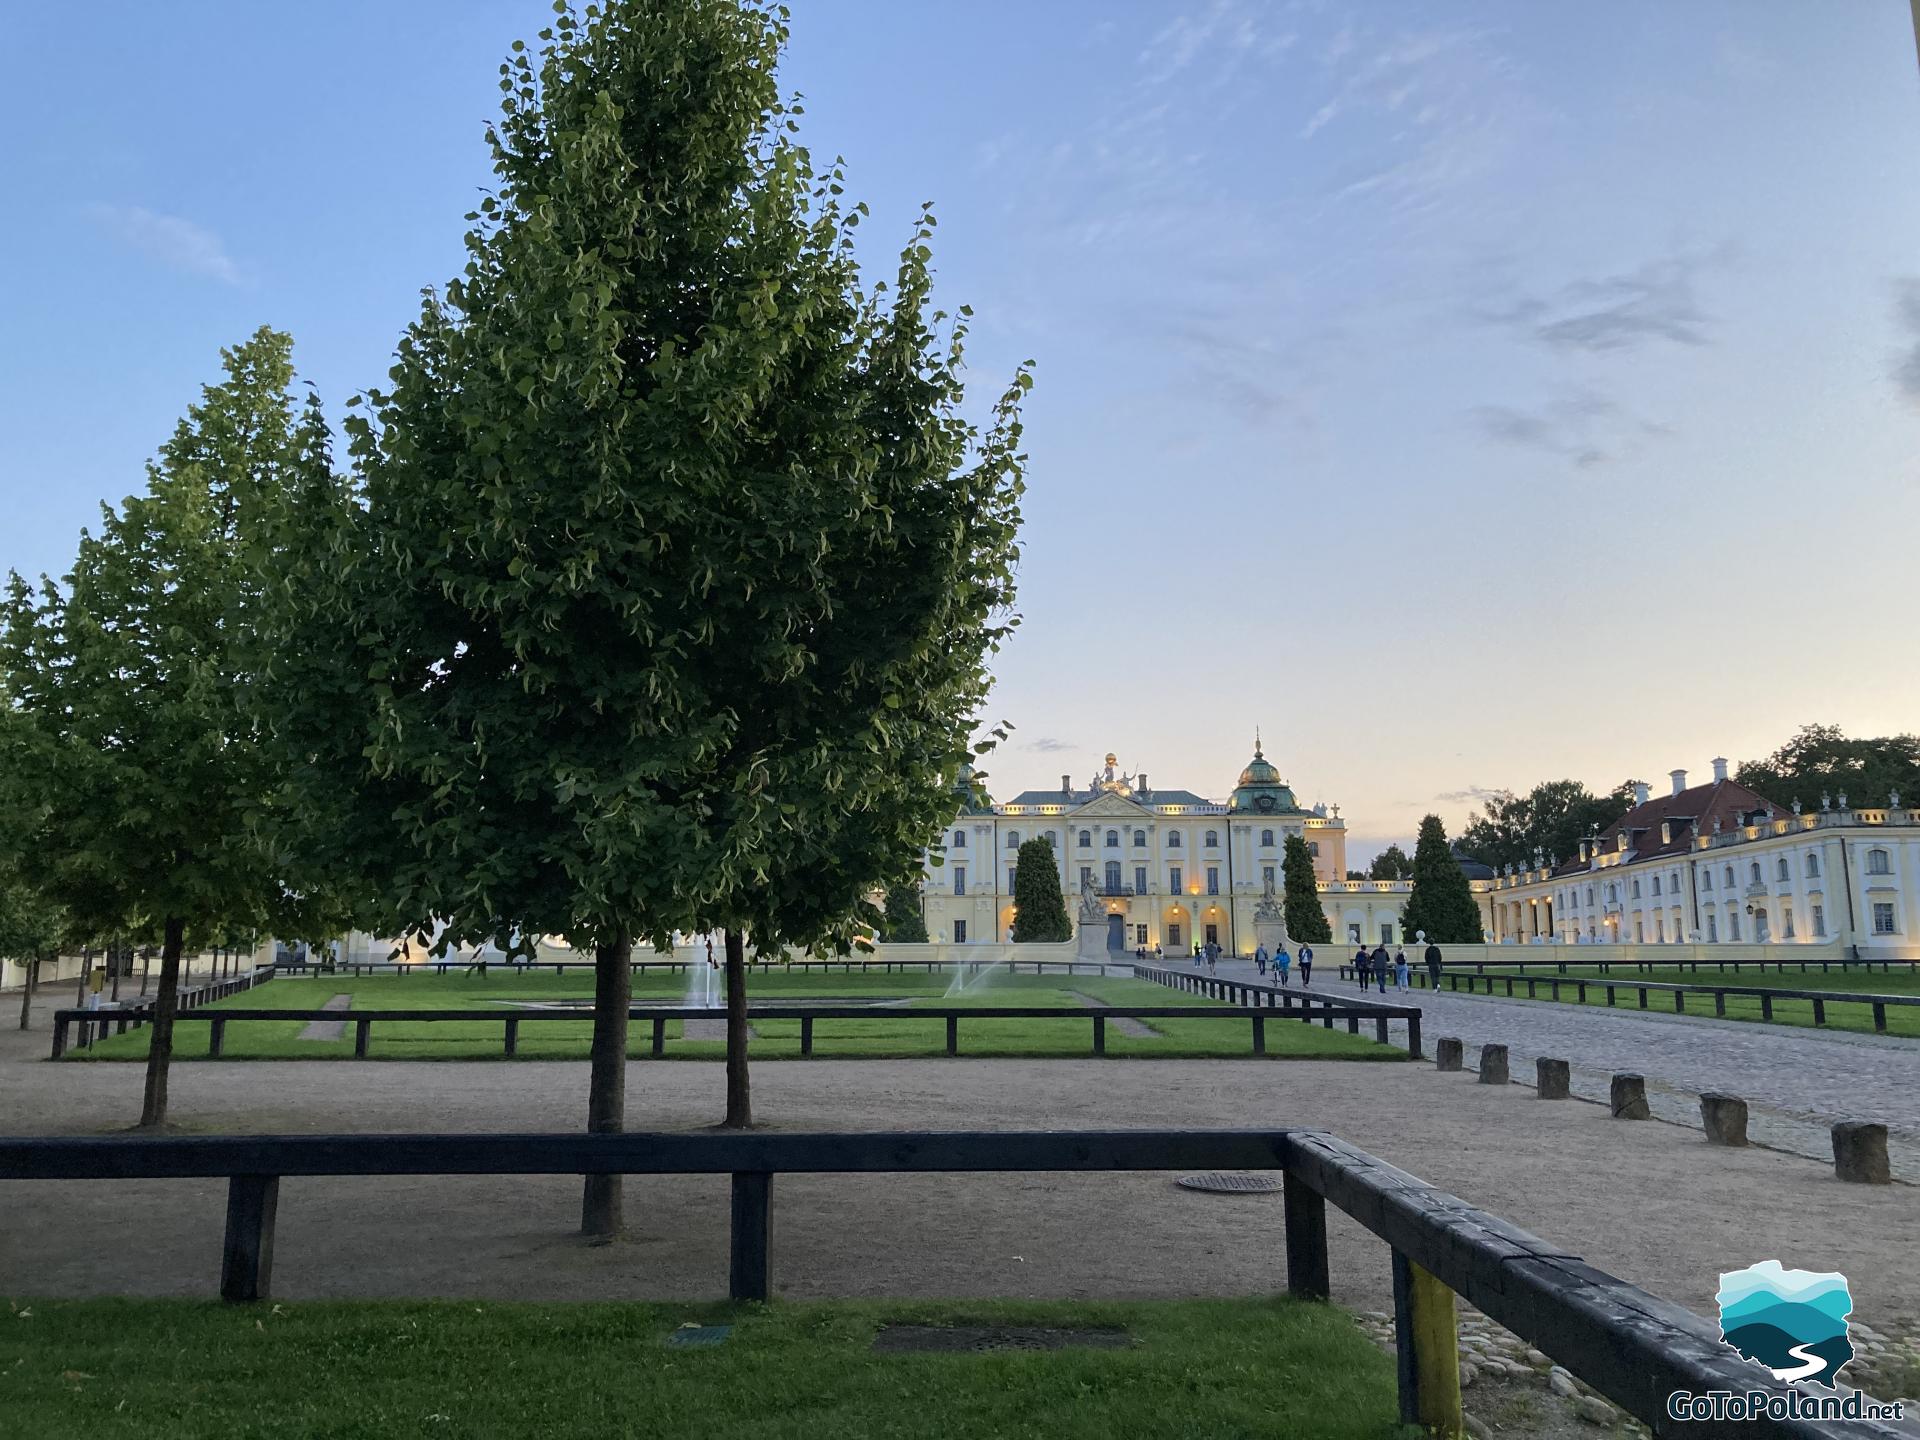 small trees in the foreground, a palace in the background